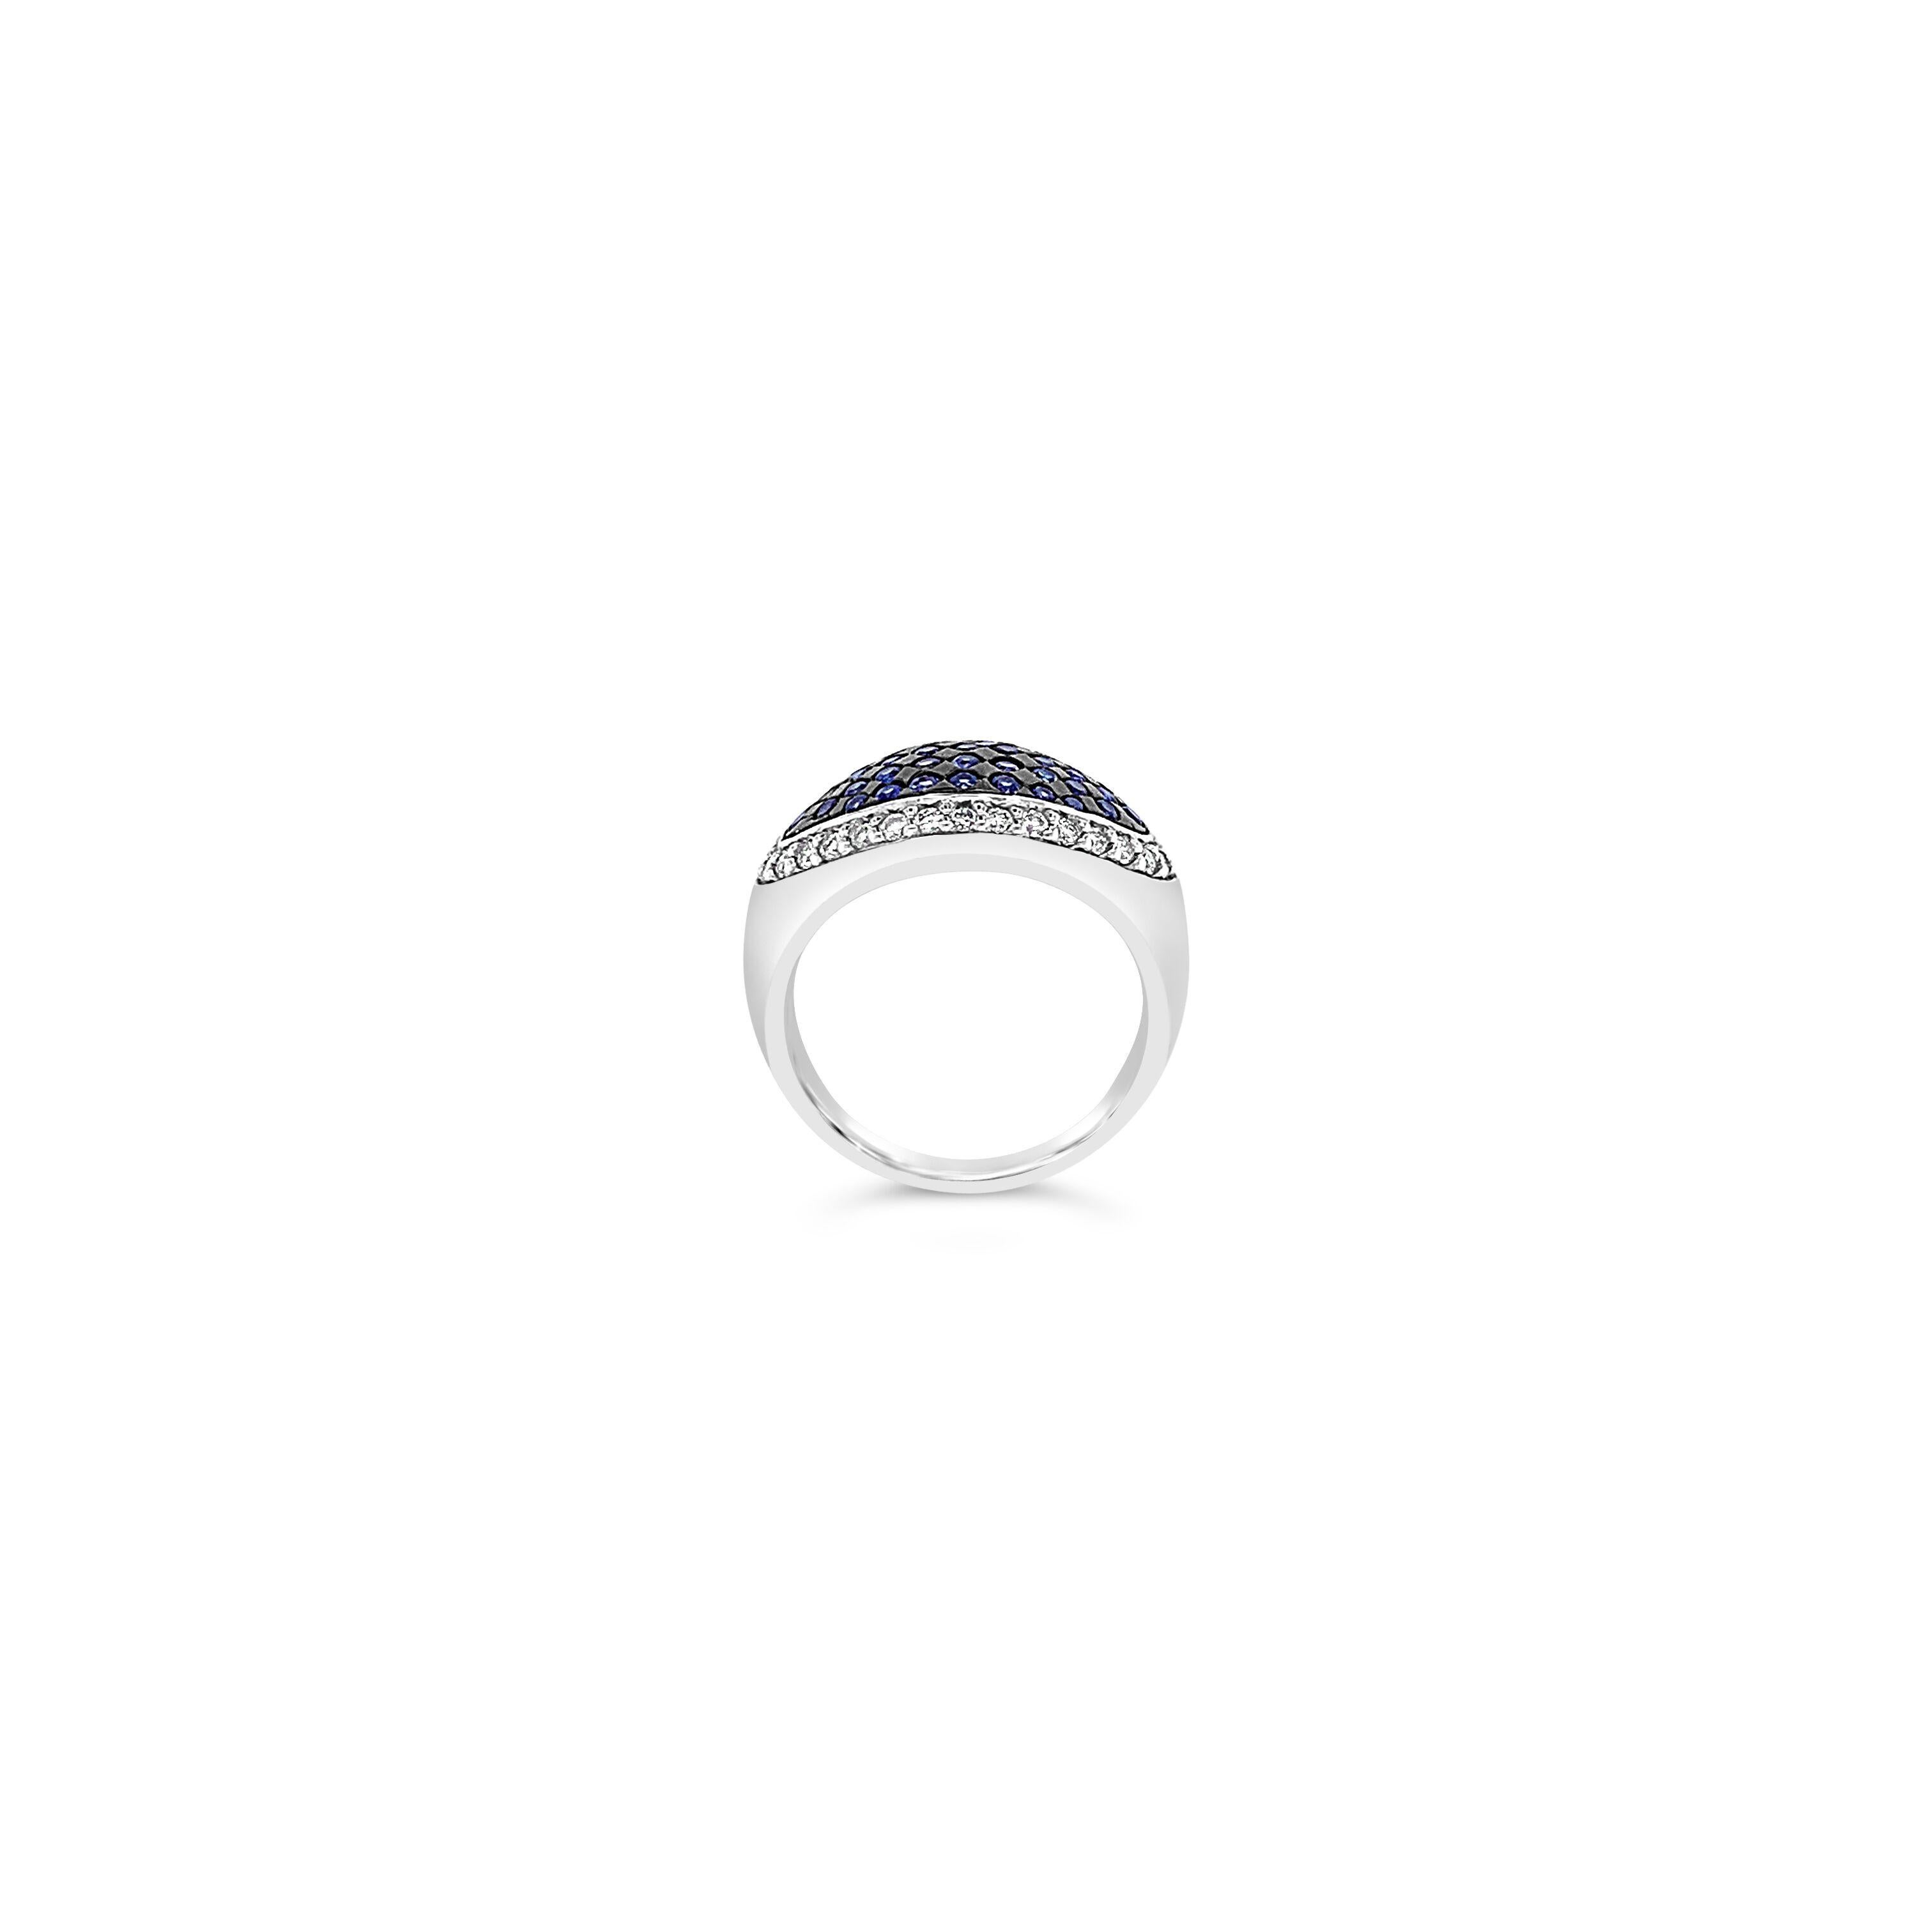 Le Vian® Ring featuring 7/8 cts. Cornflower Ceylon Sapphire™, 3/8 cts. Vanilla Diamonds® set in 14K Vanilla Gold®

Ring Size: 6.5

Ring may or may not be sizable, please feel free to reach out with any questions!

Item comes with a Le Vian® jewelry